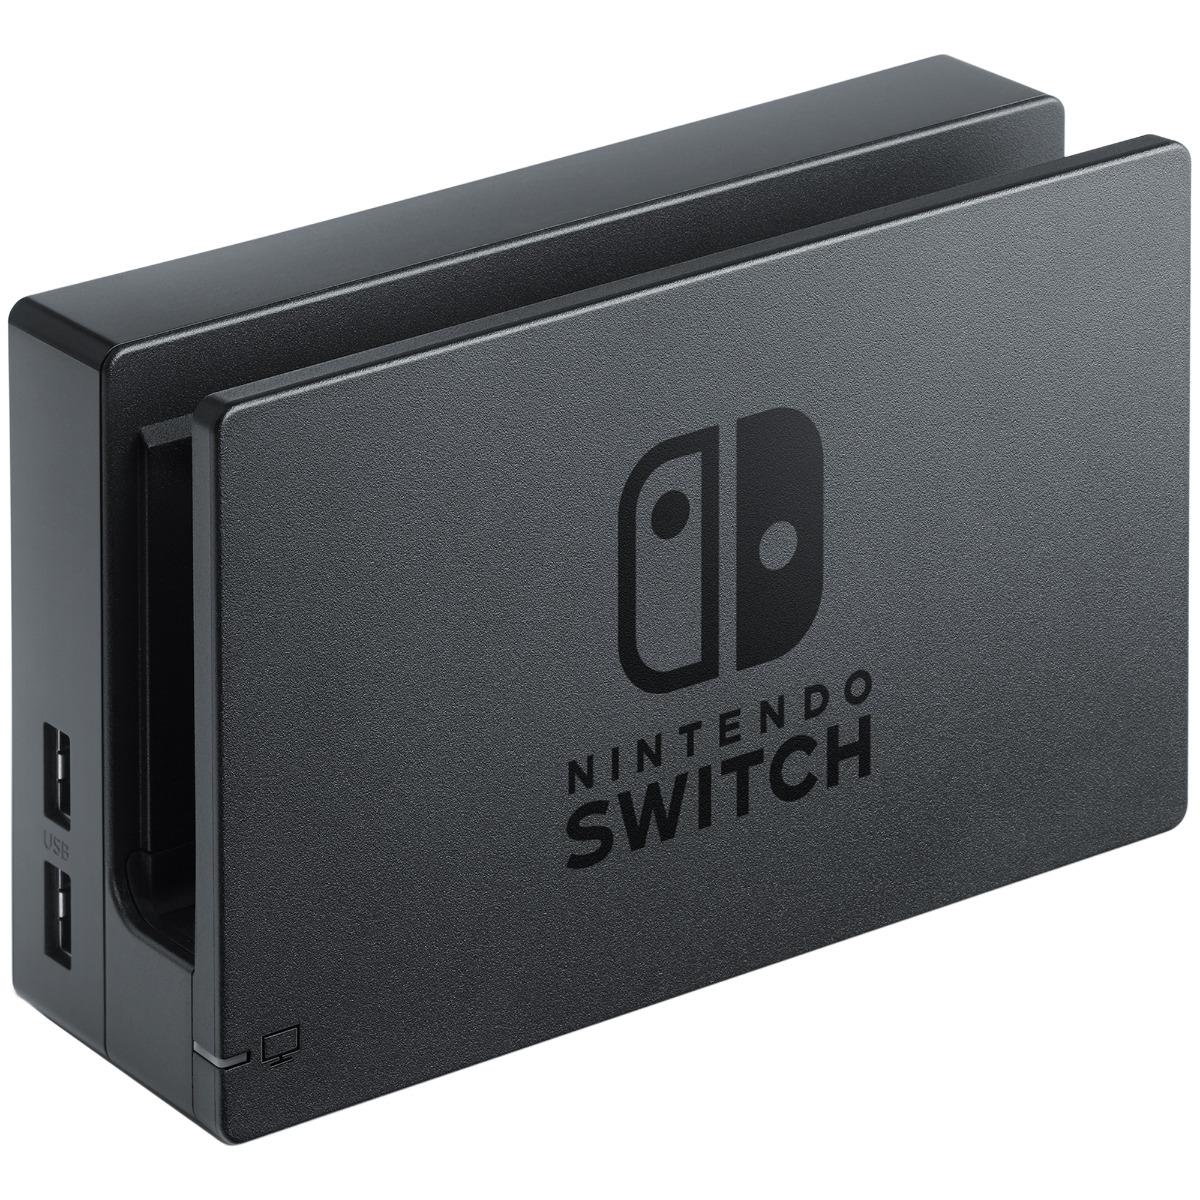 Nintendo Switch Dock for $44.99 Shipped